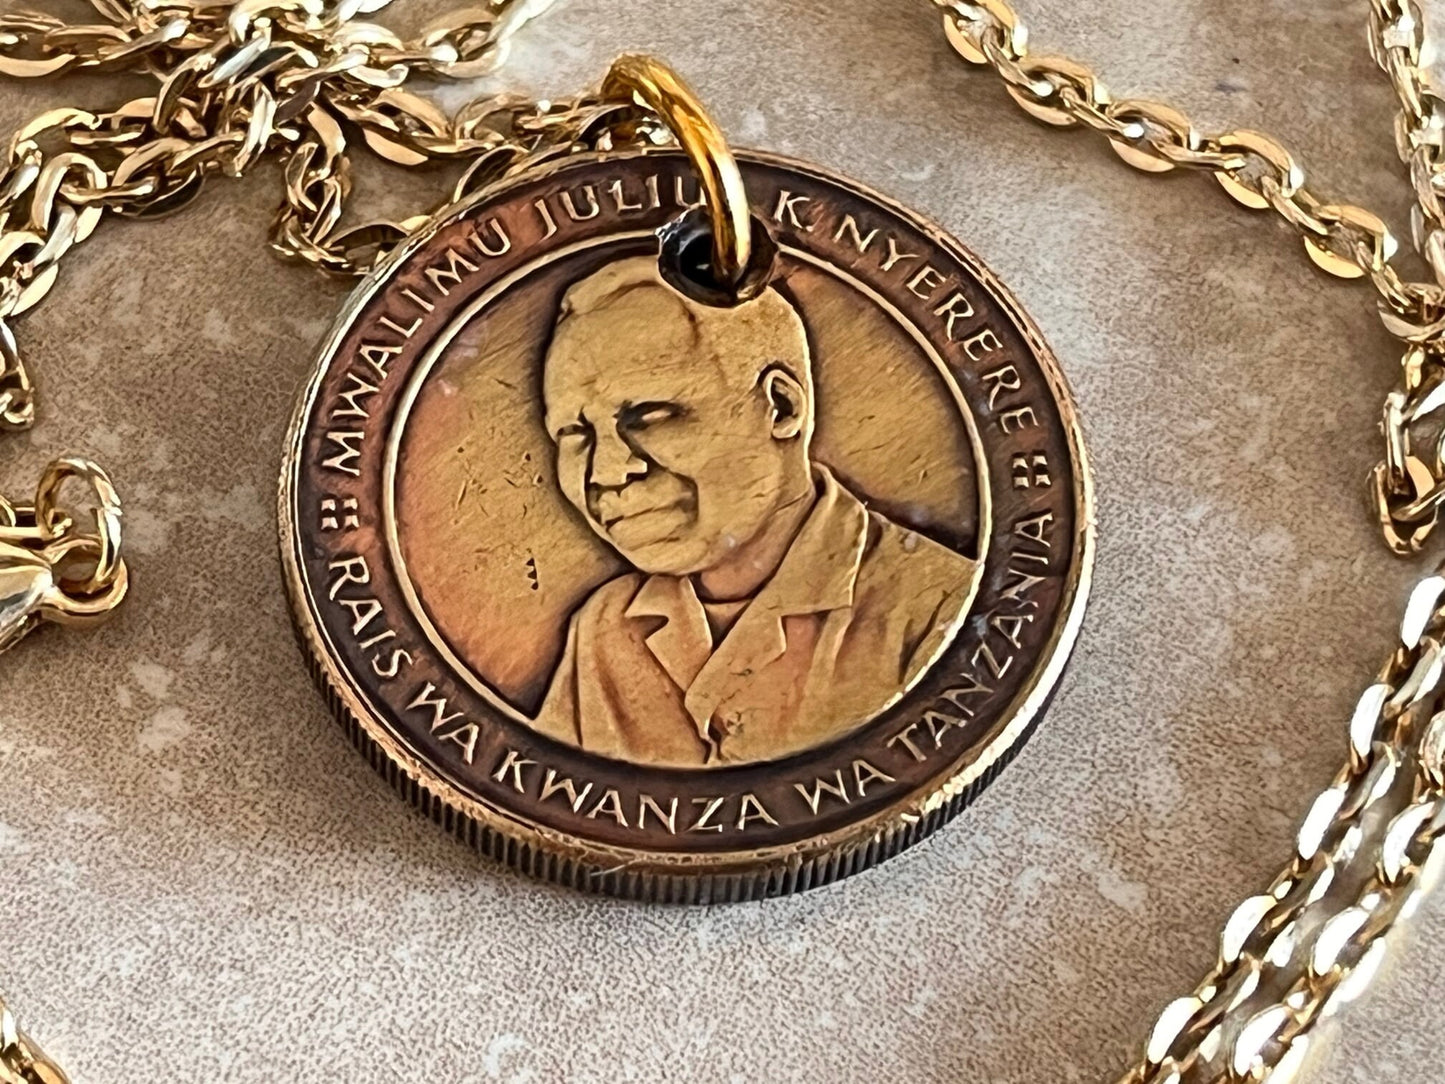 Tanzania Coin Necklace 100 Shilling Africa Pendant Personal Old Vintage Handmade Jewelry Gift Friend Charm For Him Her World Coin Collector